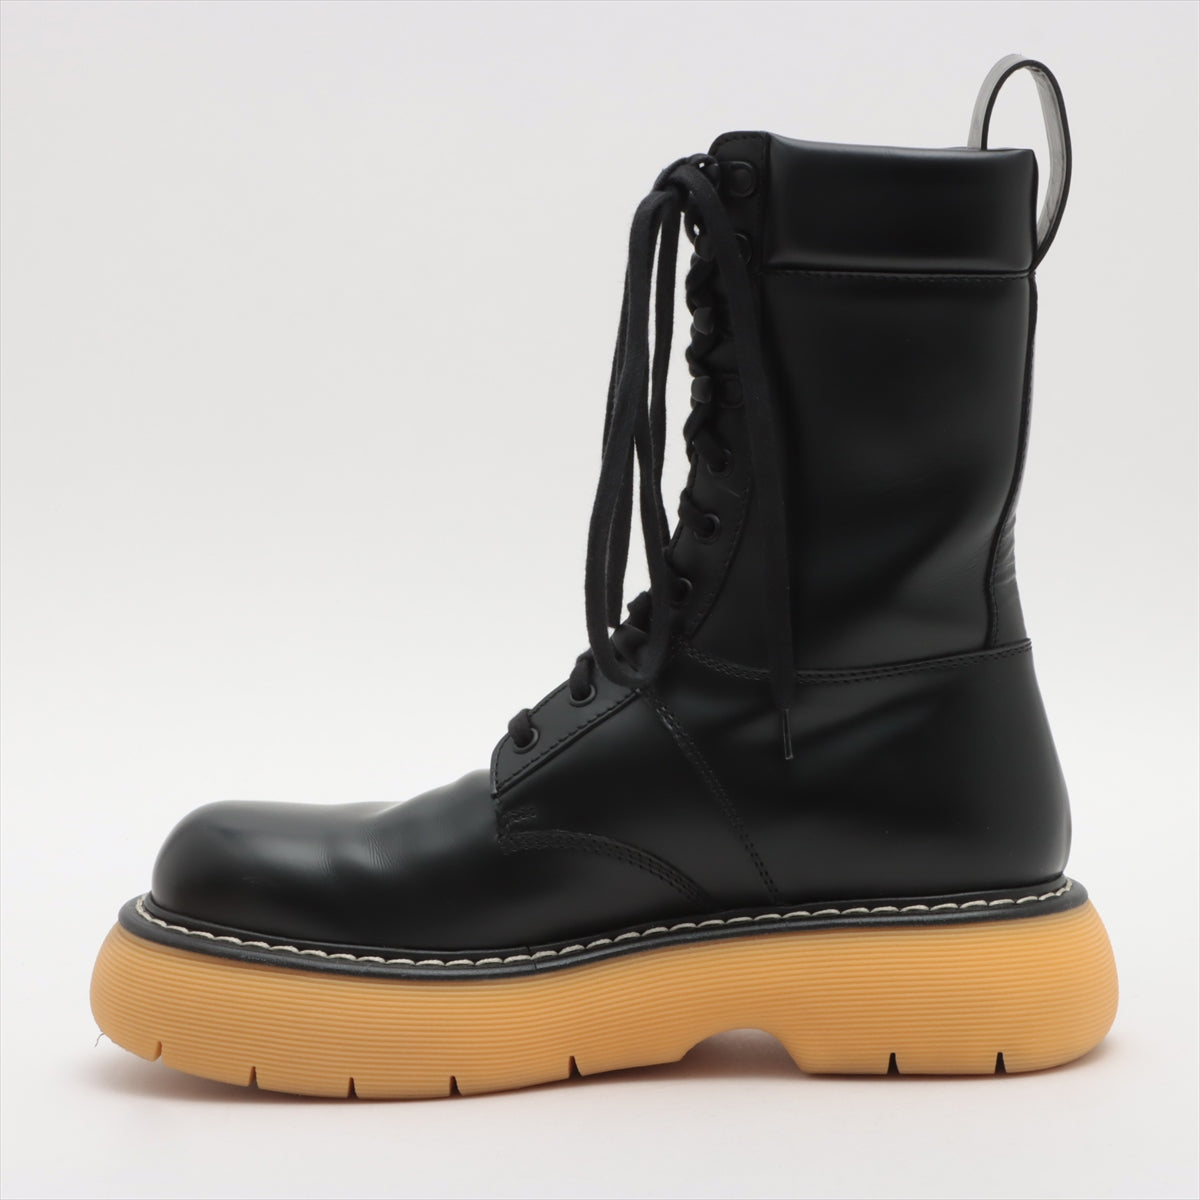 Bottega Veneta Leather Boots 42 Men's Black The Bounce Is there a replacement string There is a thread on the upper